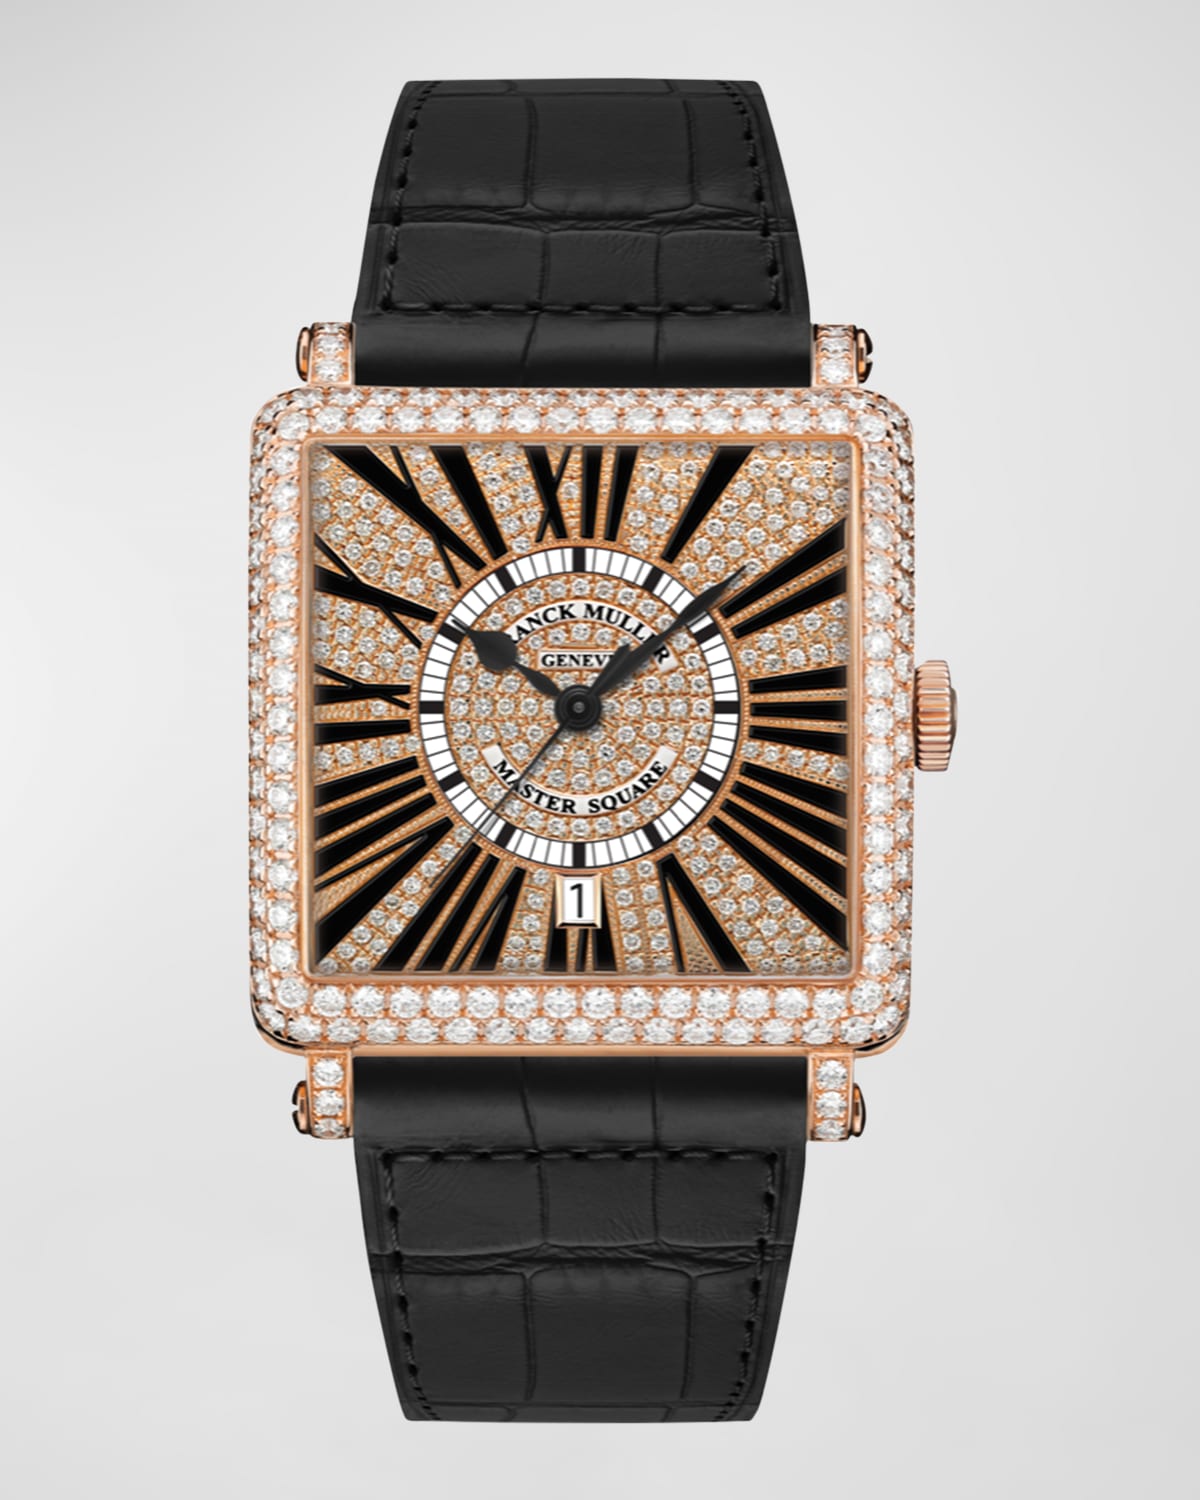 Franck Muller Men's Master Square Watch with Pave Diamonds